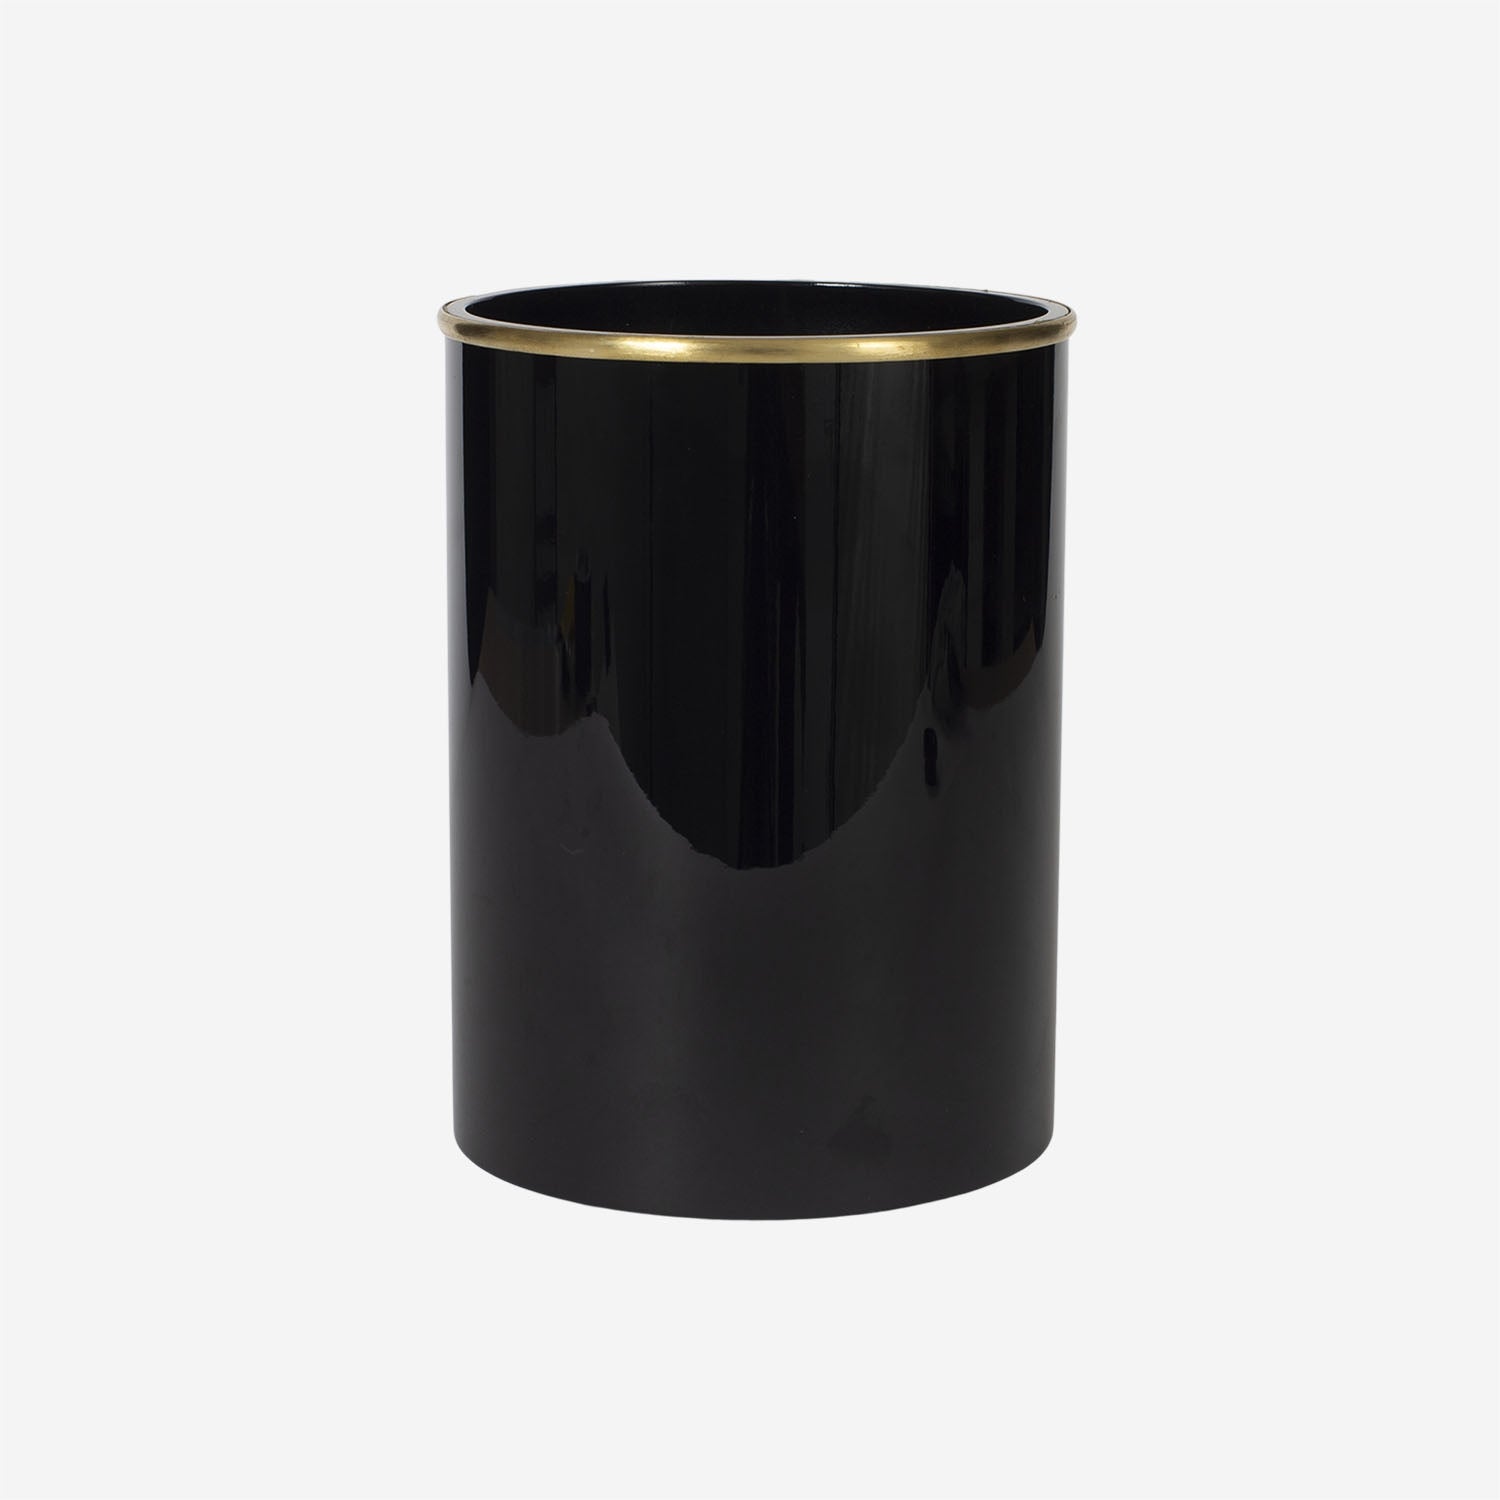 Lacquer Vase Black with Brass Brim 5x8 inch